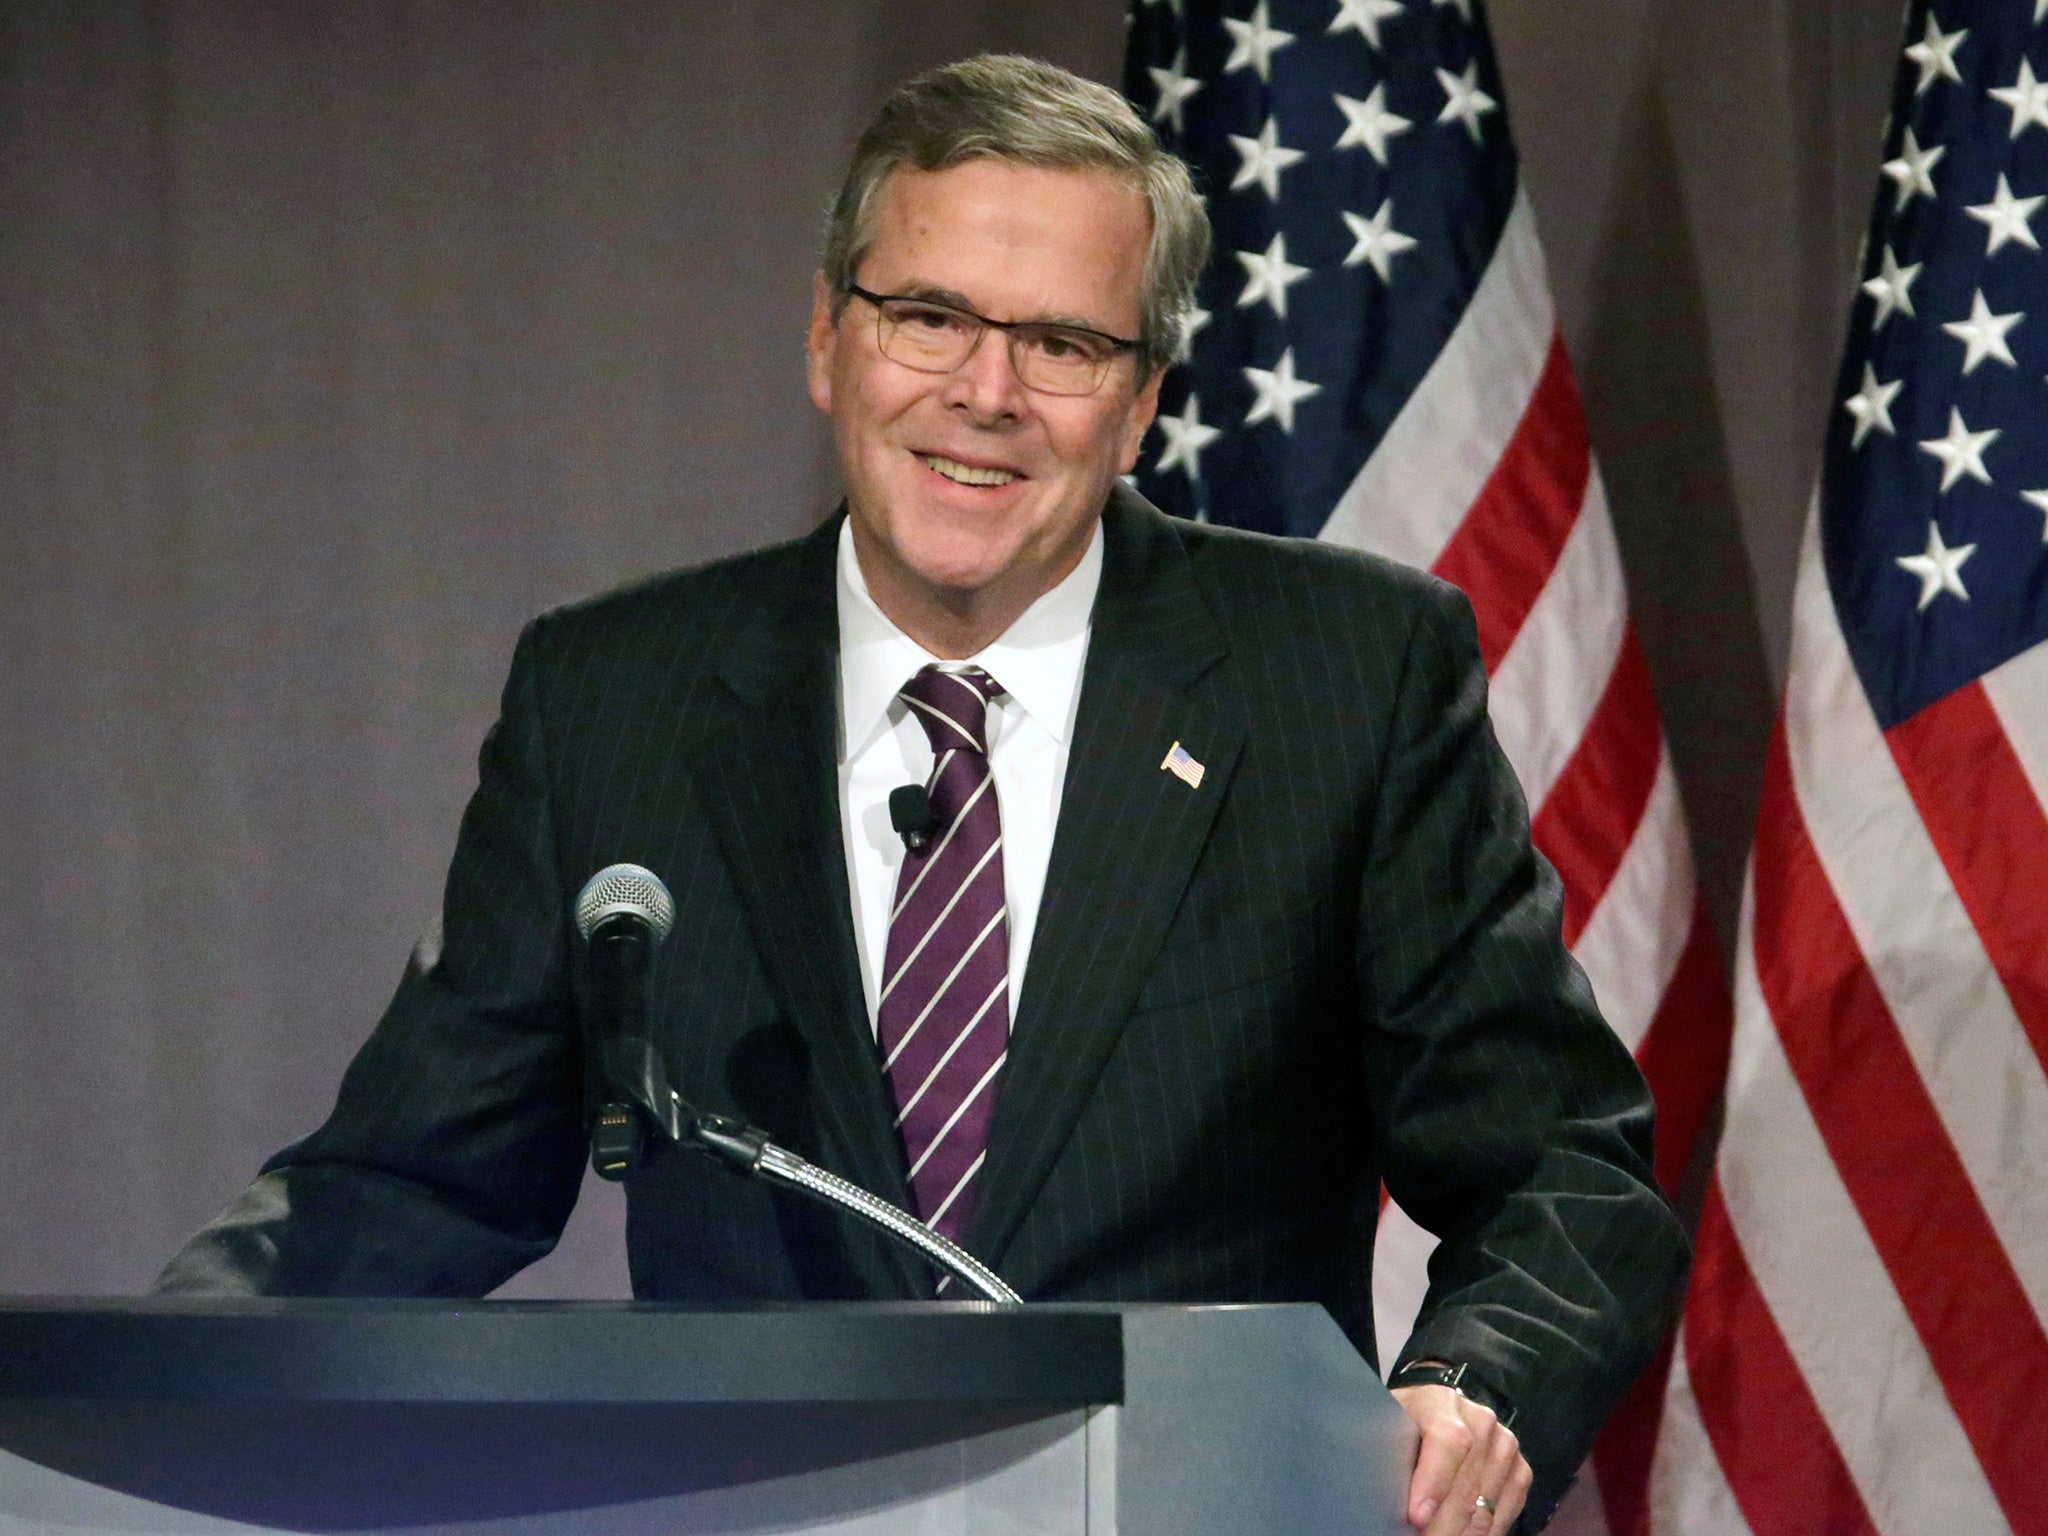 Jeb Bush has faced Republican accusations he lacks the conservative credentials to lead them